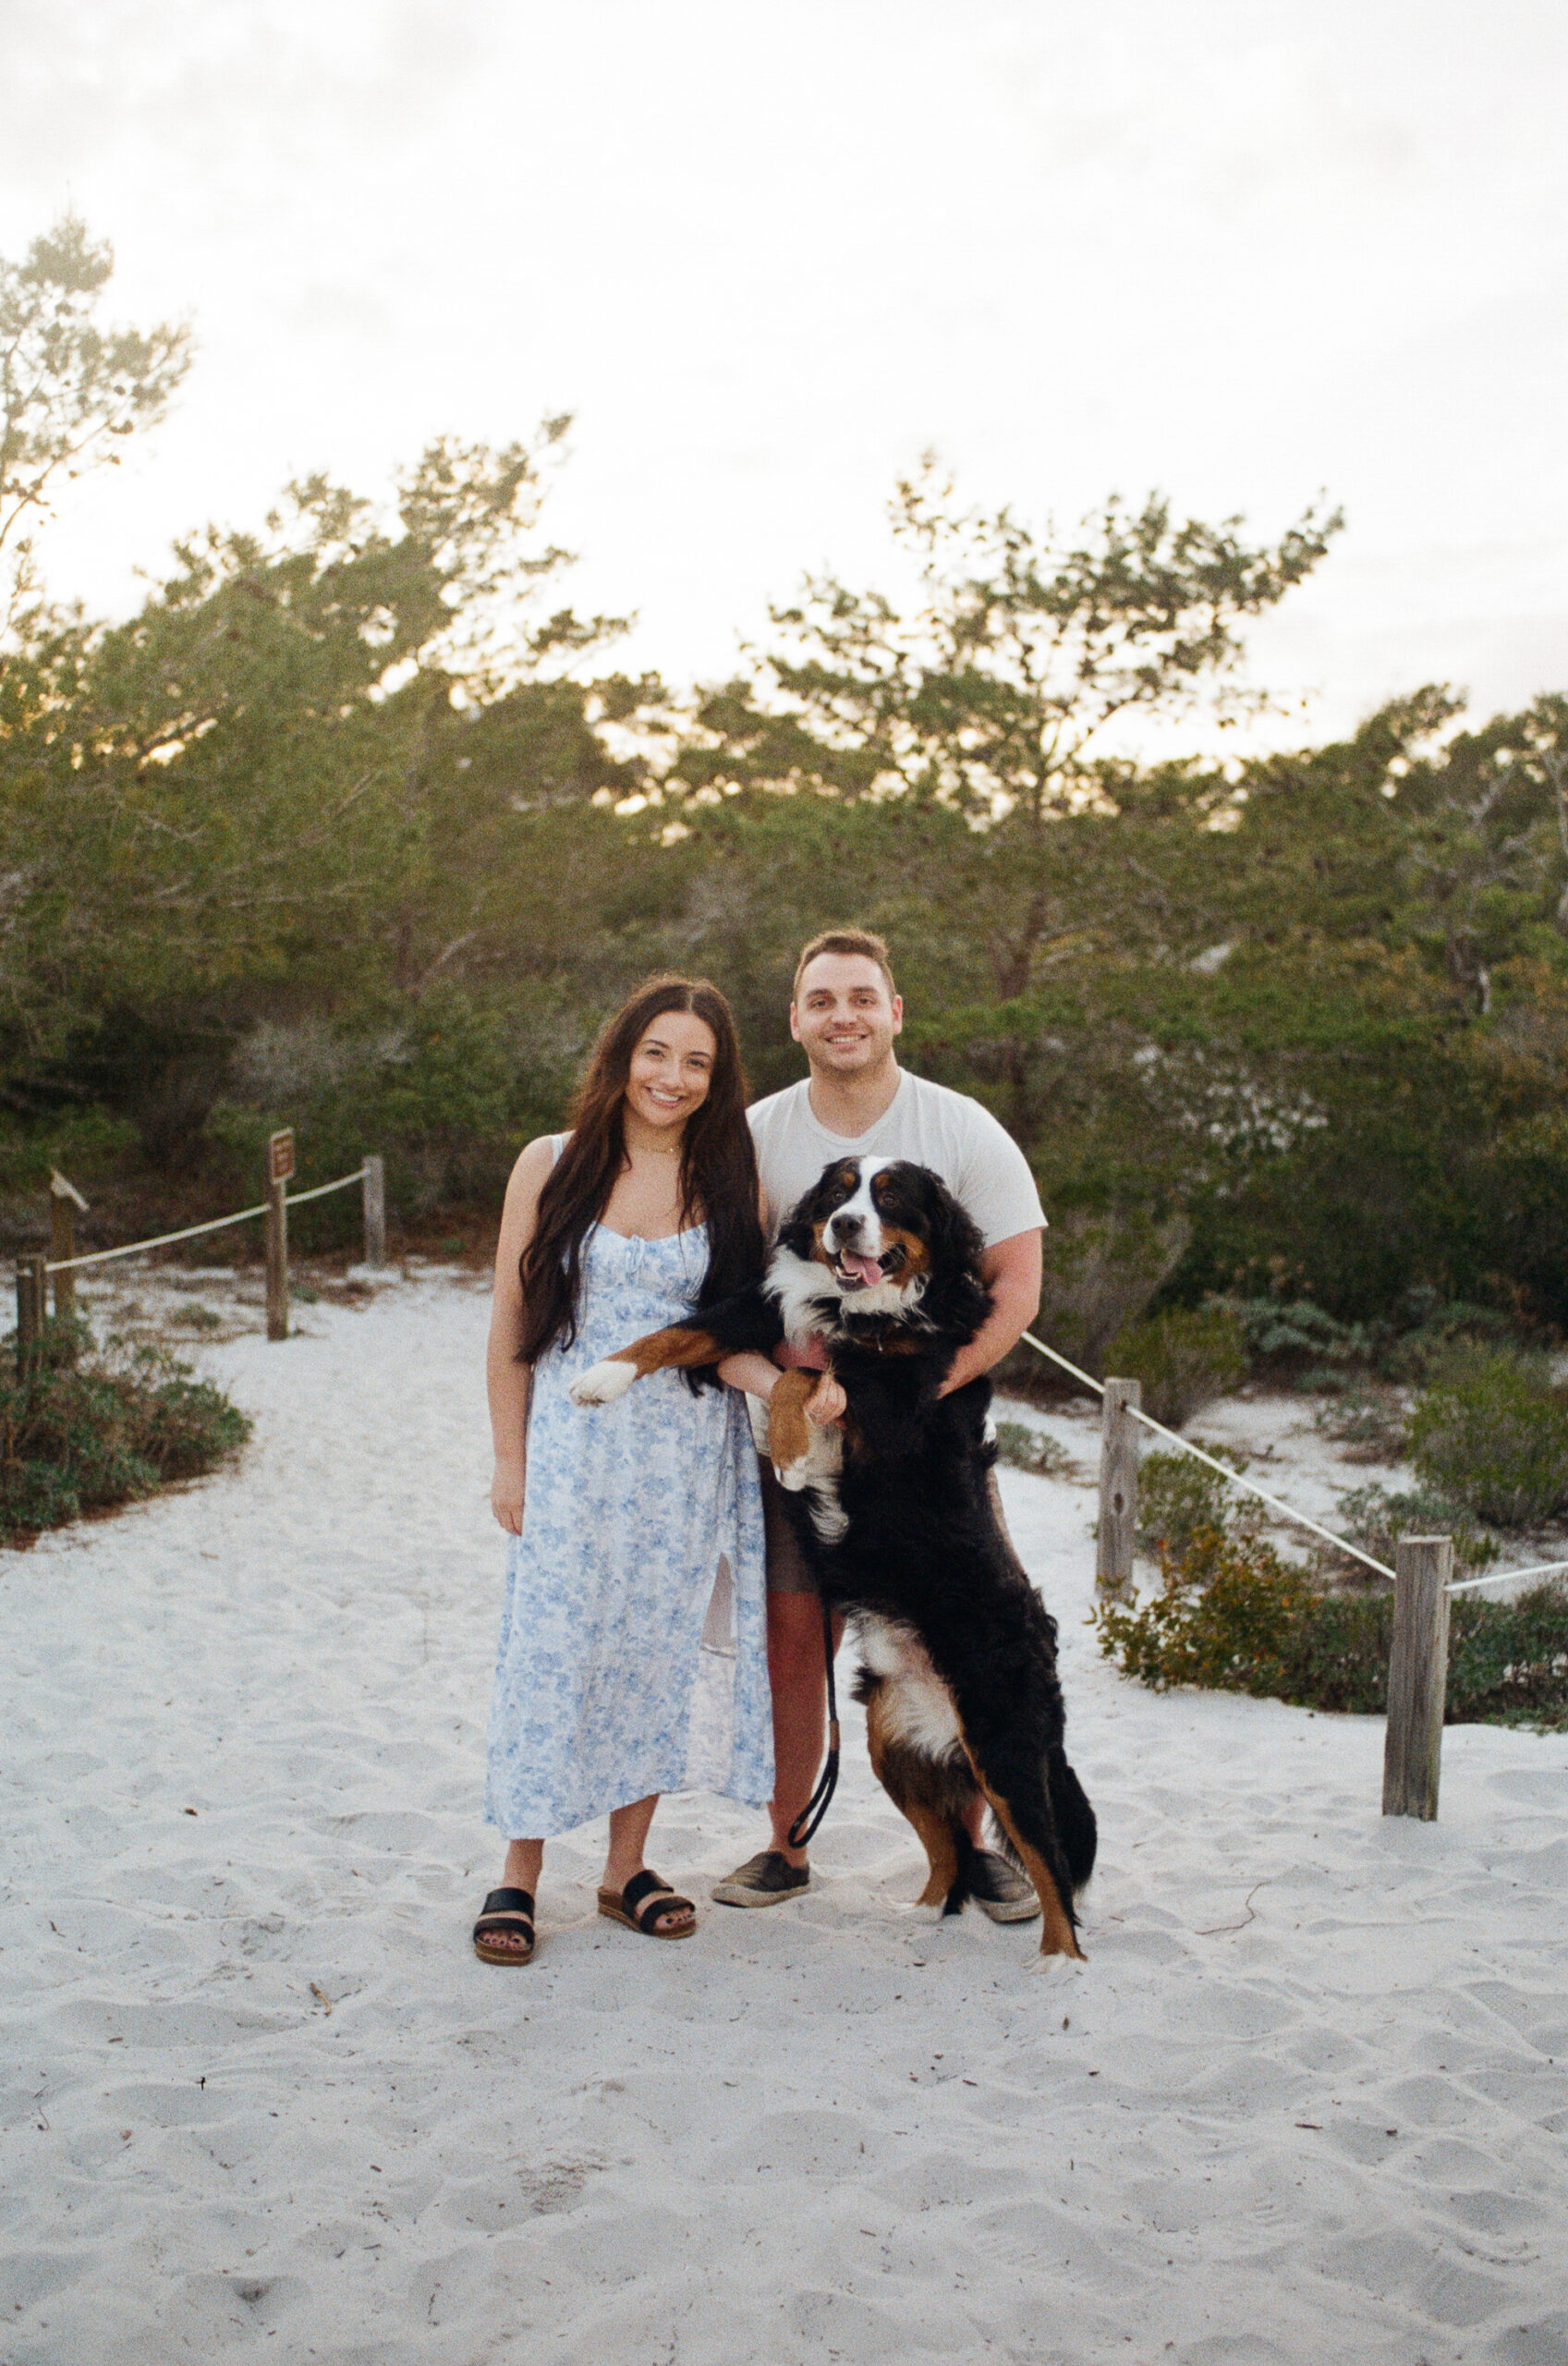 A couple standing and smiling as the man holds up their large St. Bernard dog, and the dog looks as if he is smiling as well during their Destin Florida photo shoot